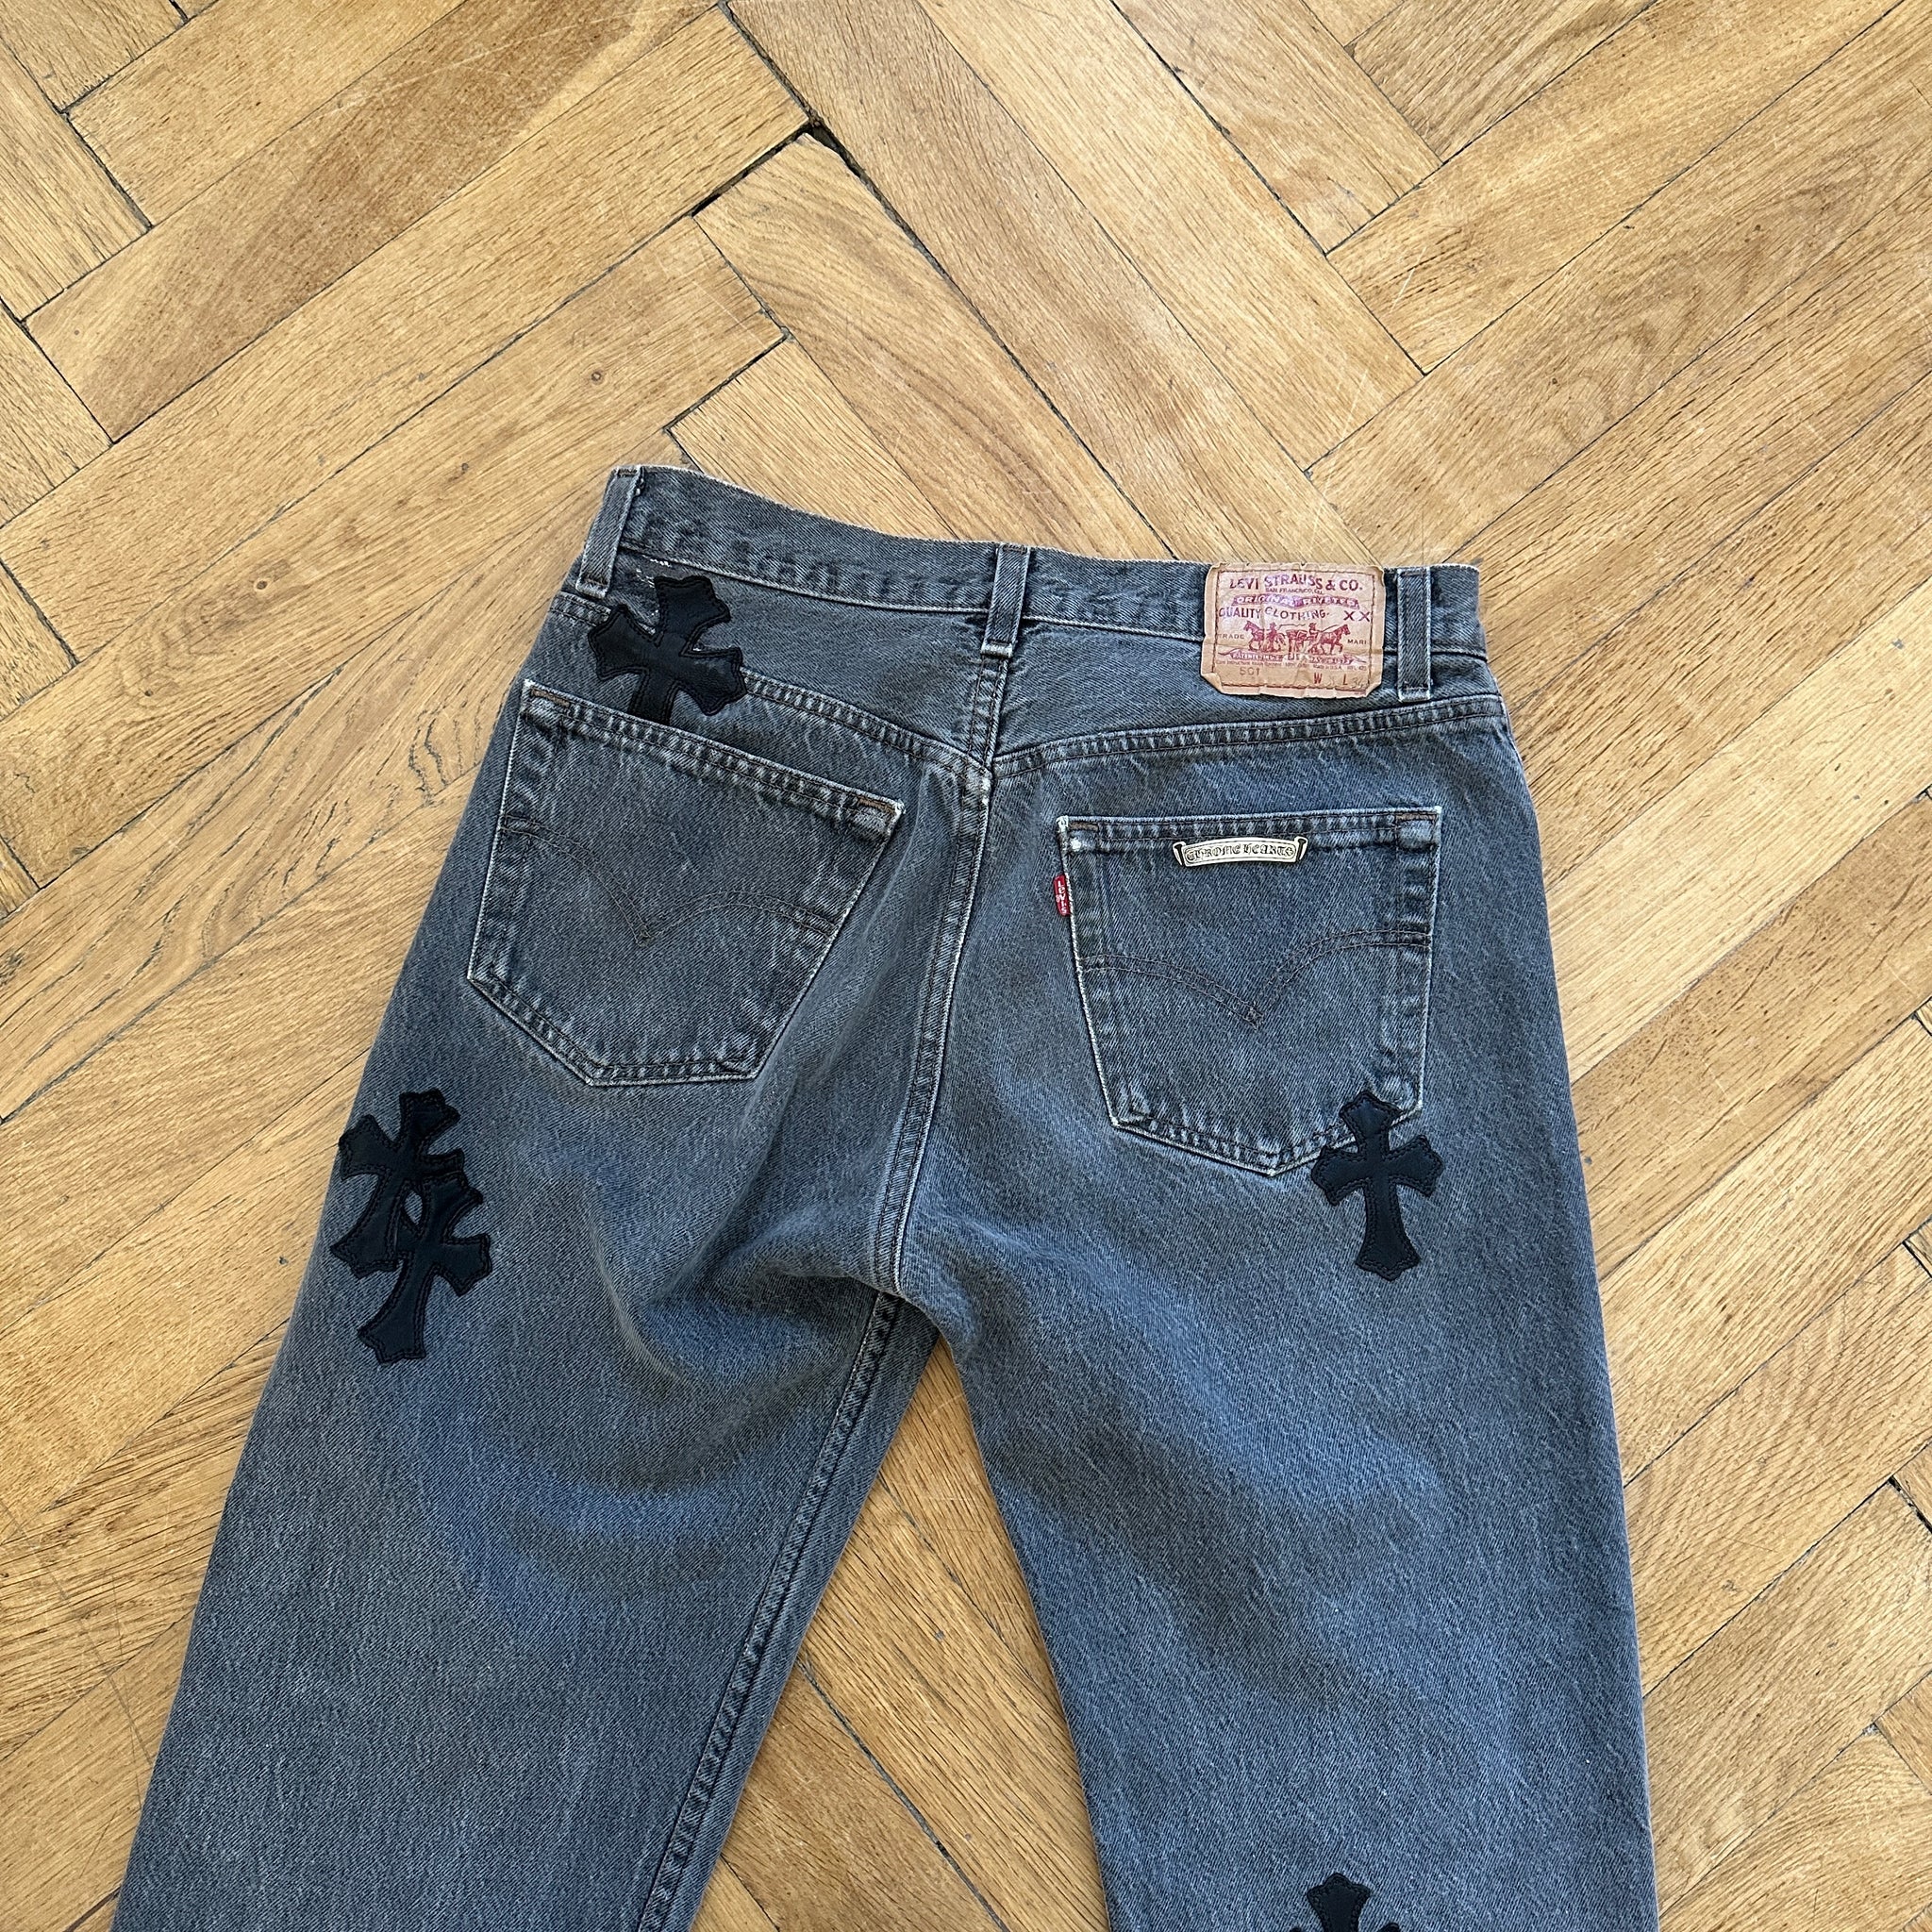 Blue Denim Jeans With Cross Patches